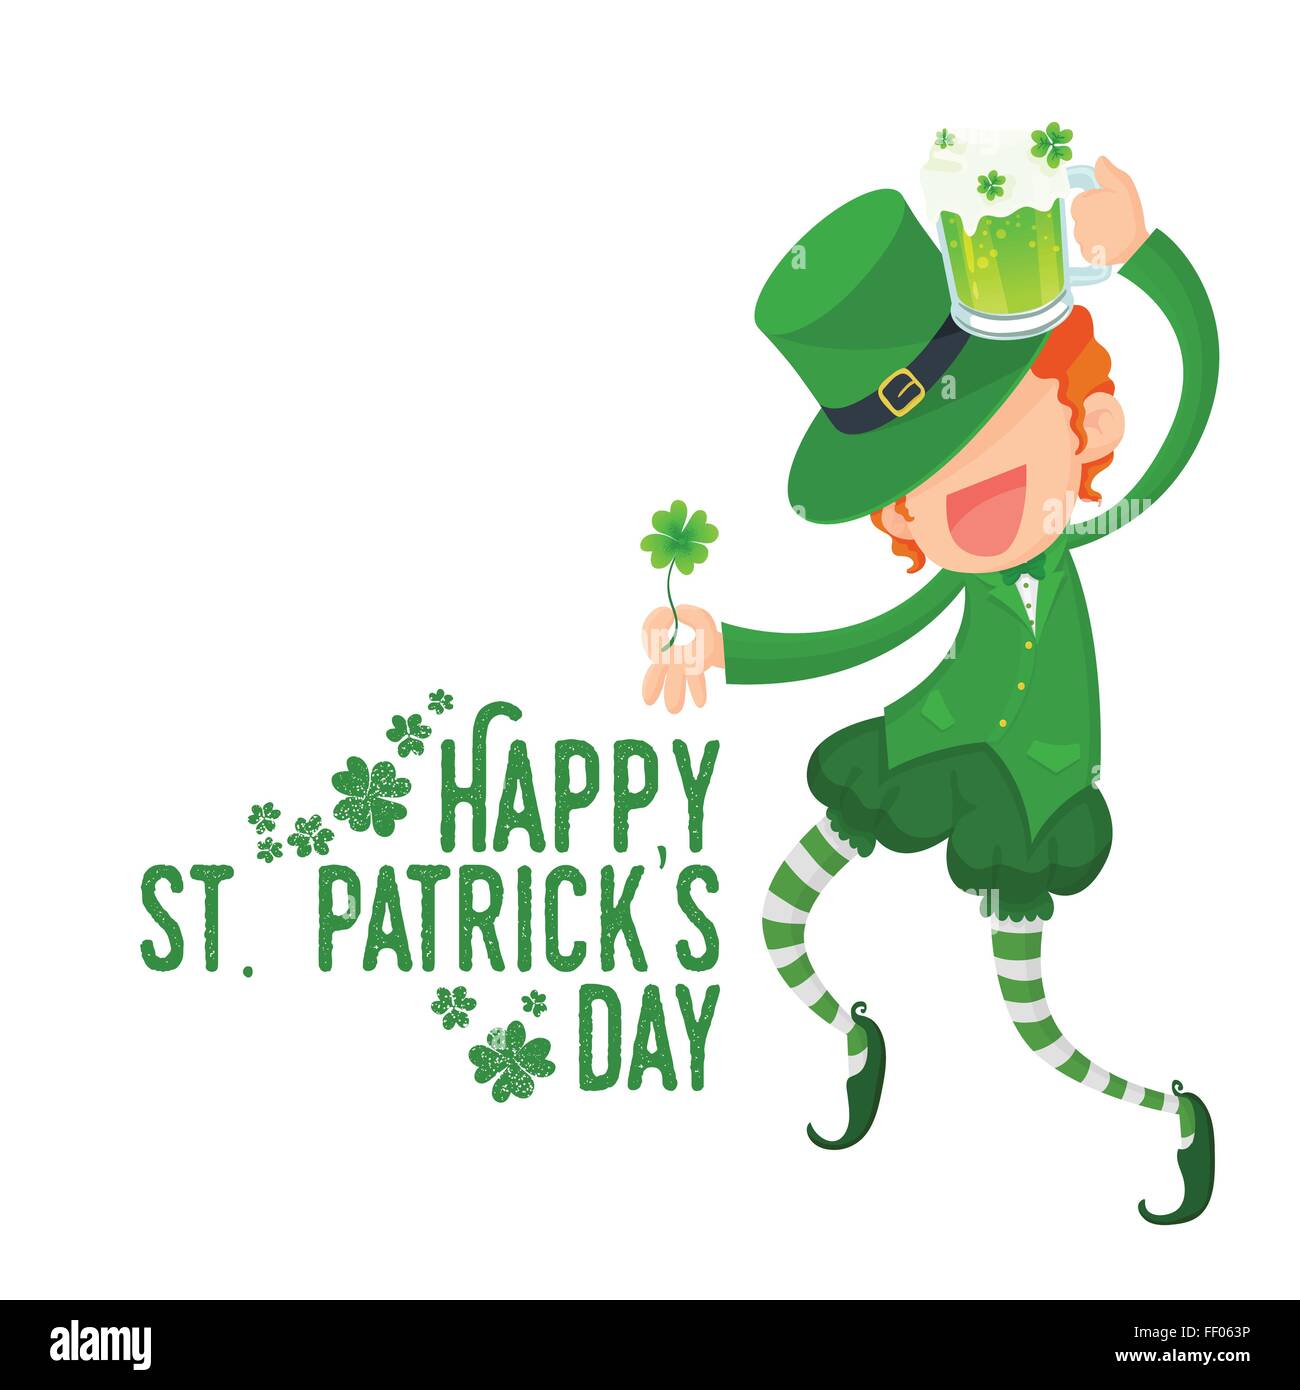 Vector Illustration of Happy Leprechaun Holding Four-Leaf Clover and Green Beer for St. Patrick's Day Card Stock Vector